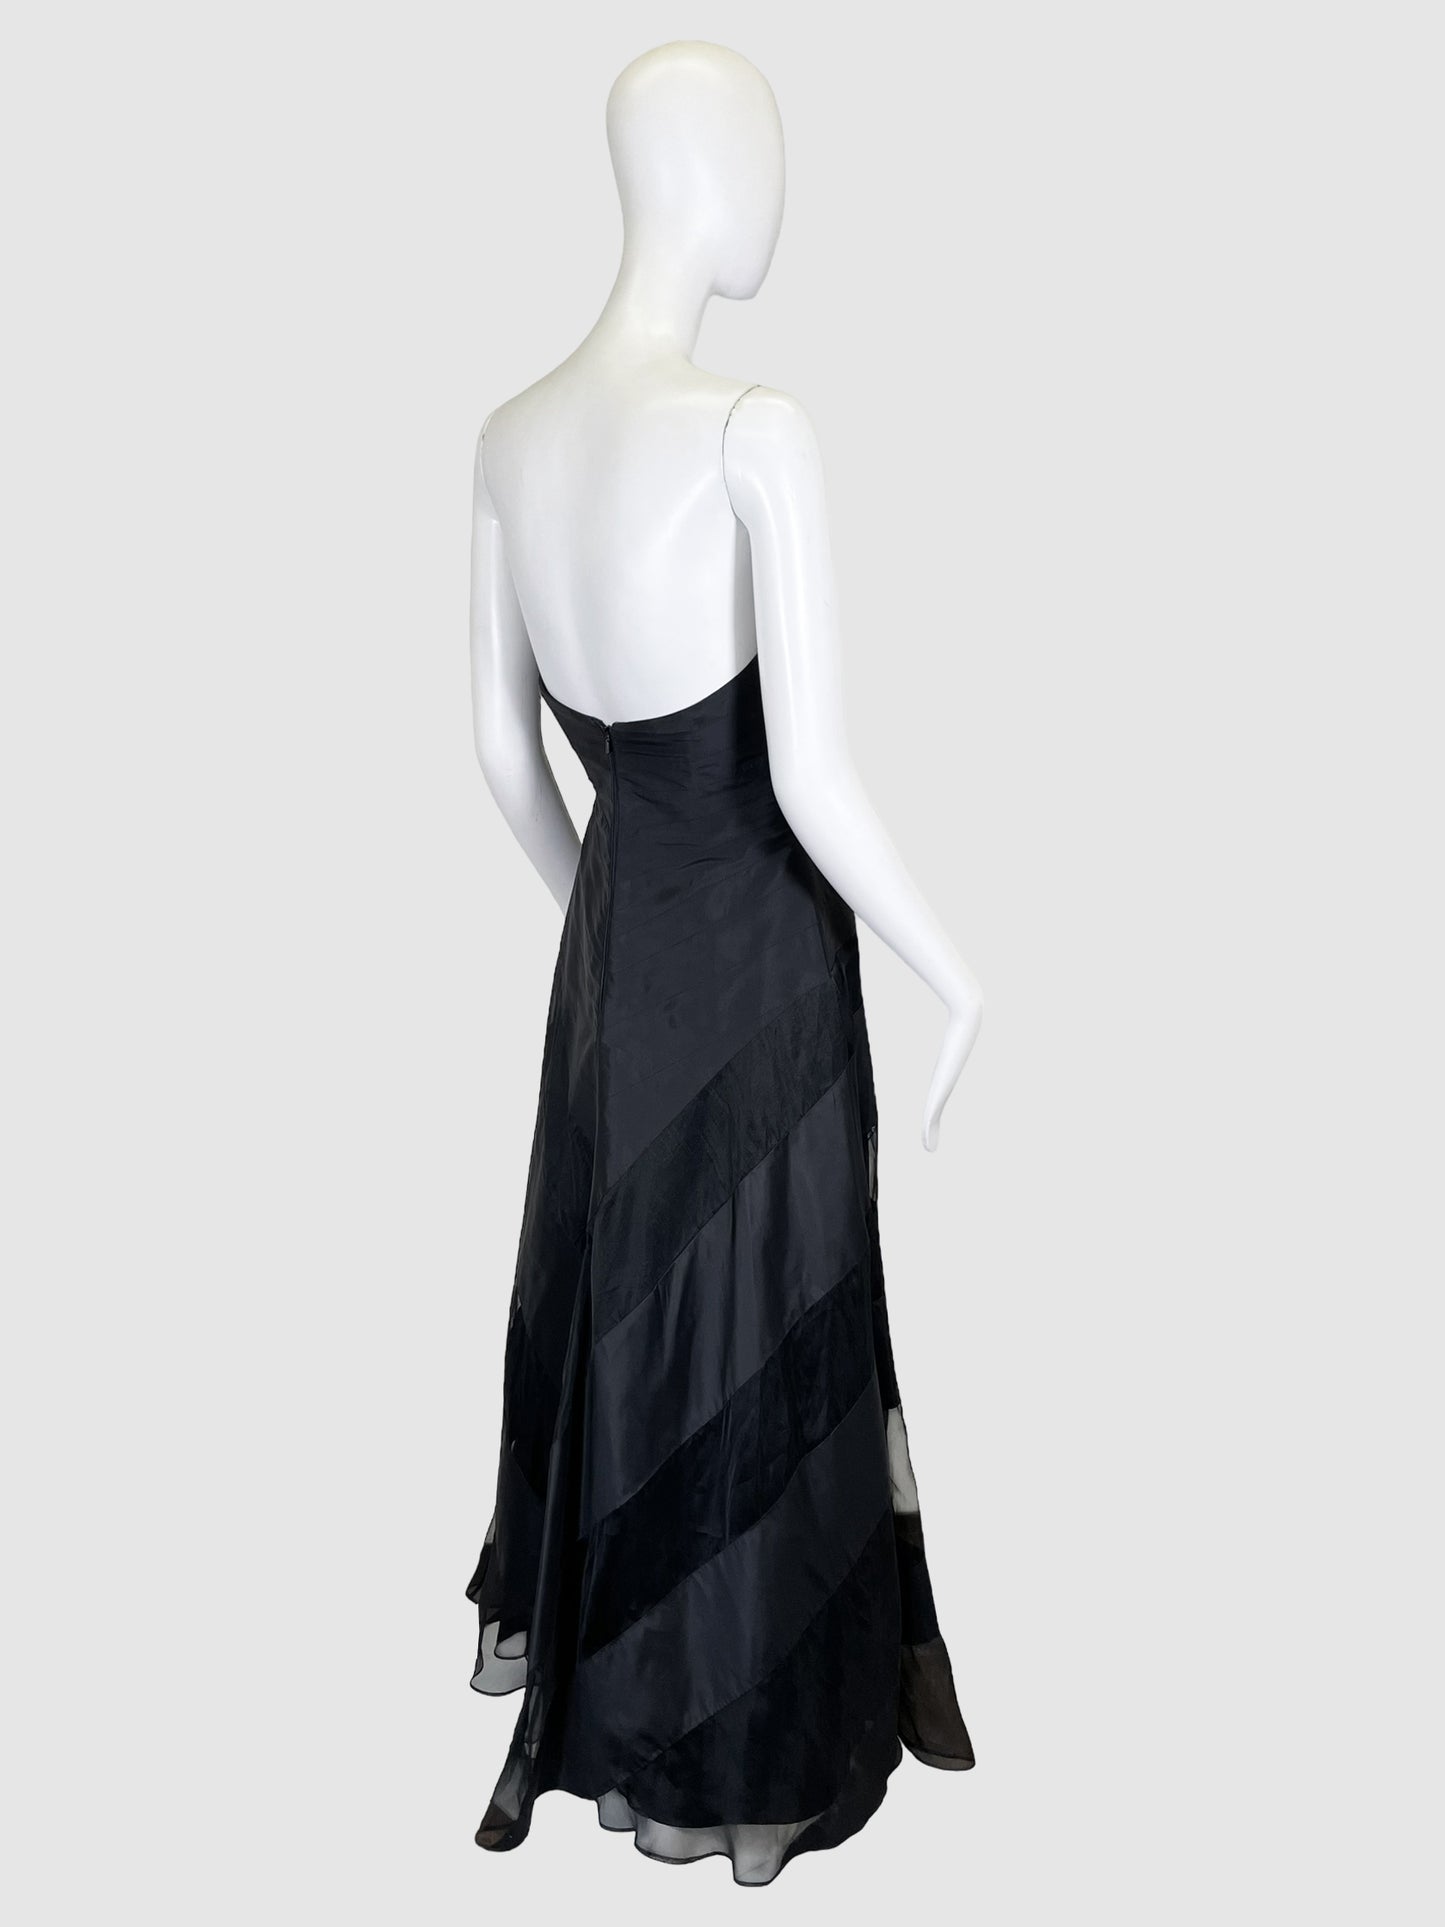 Strapless Gown Dress - Size 6